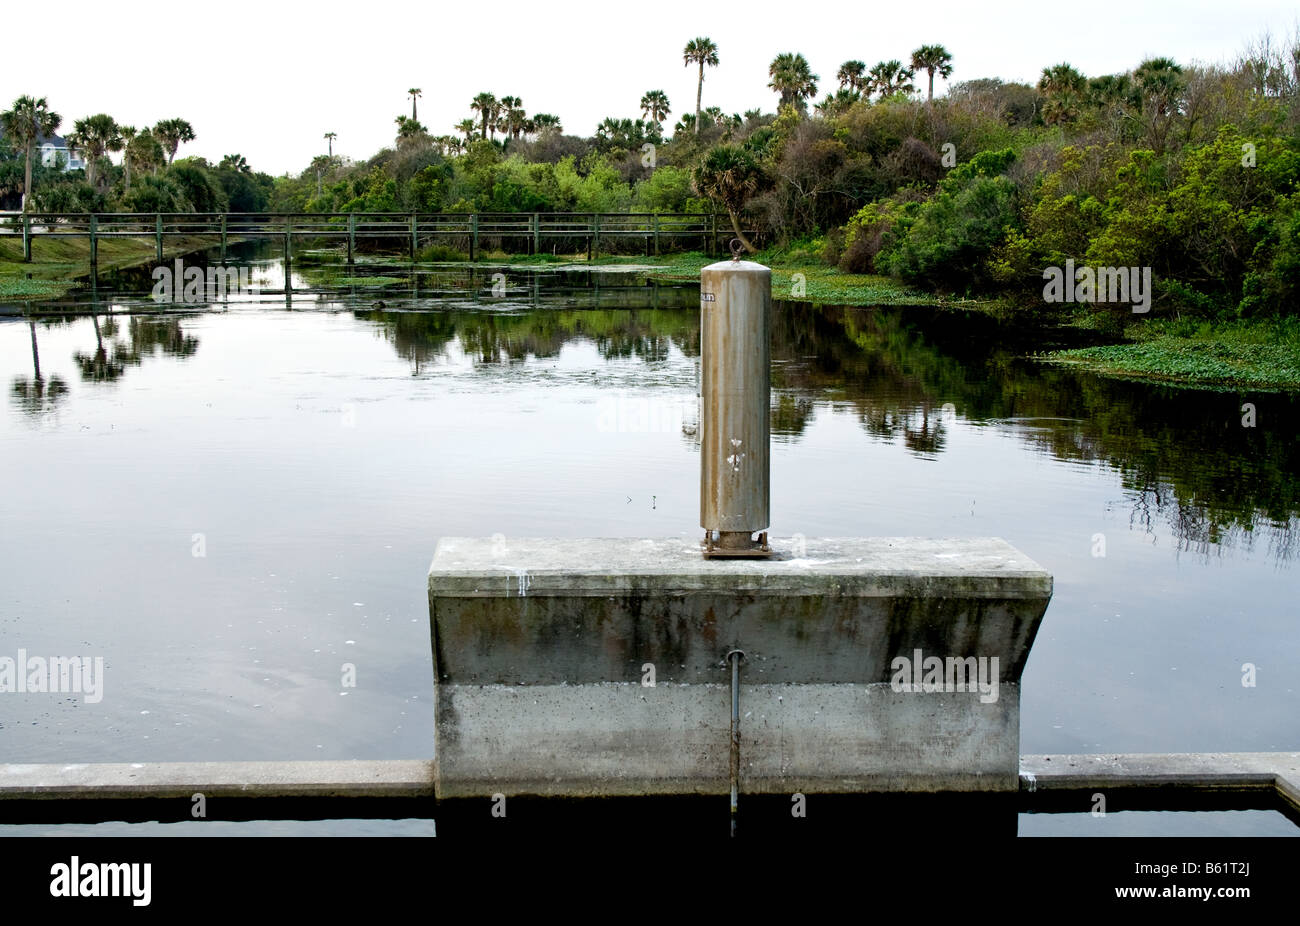 Metal cylinder on a concrete base by a tranquil lake in Florida Stock Photo